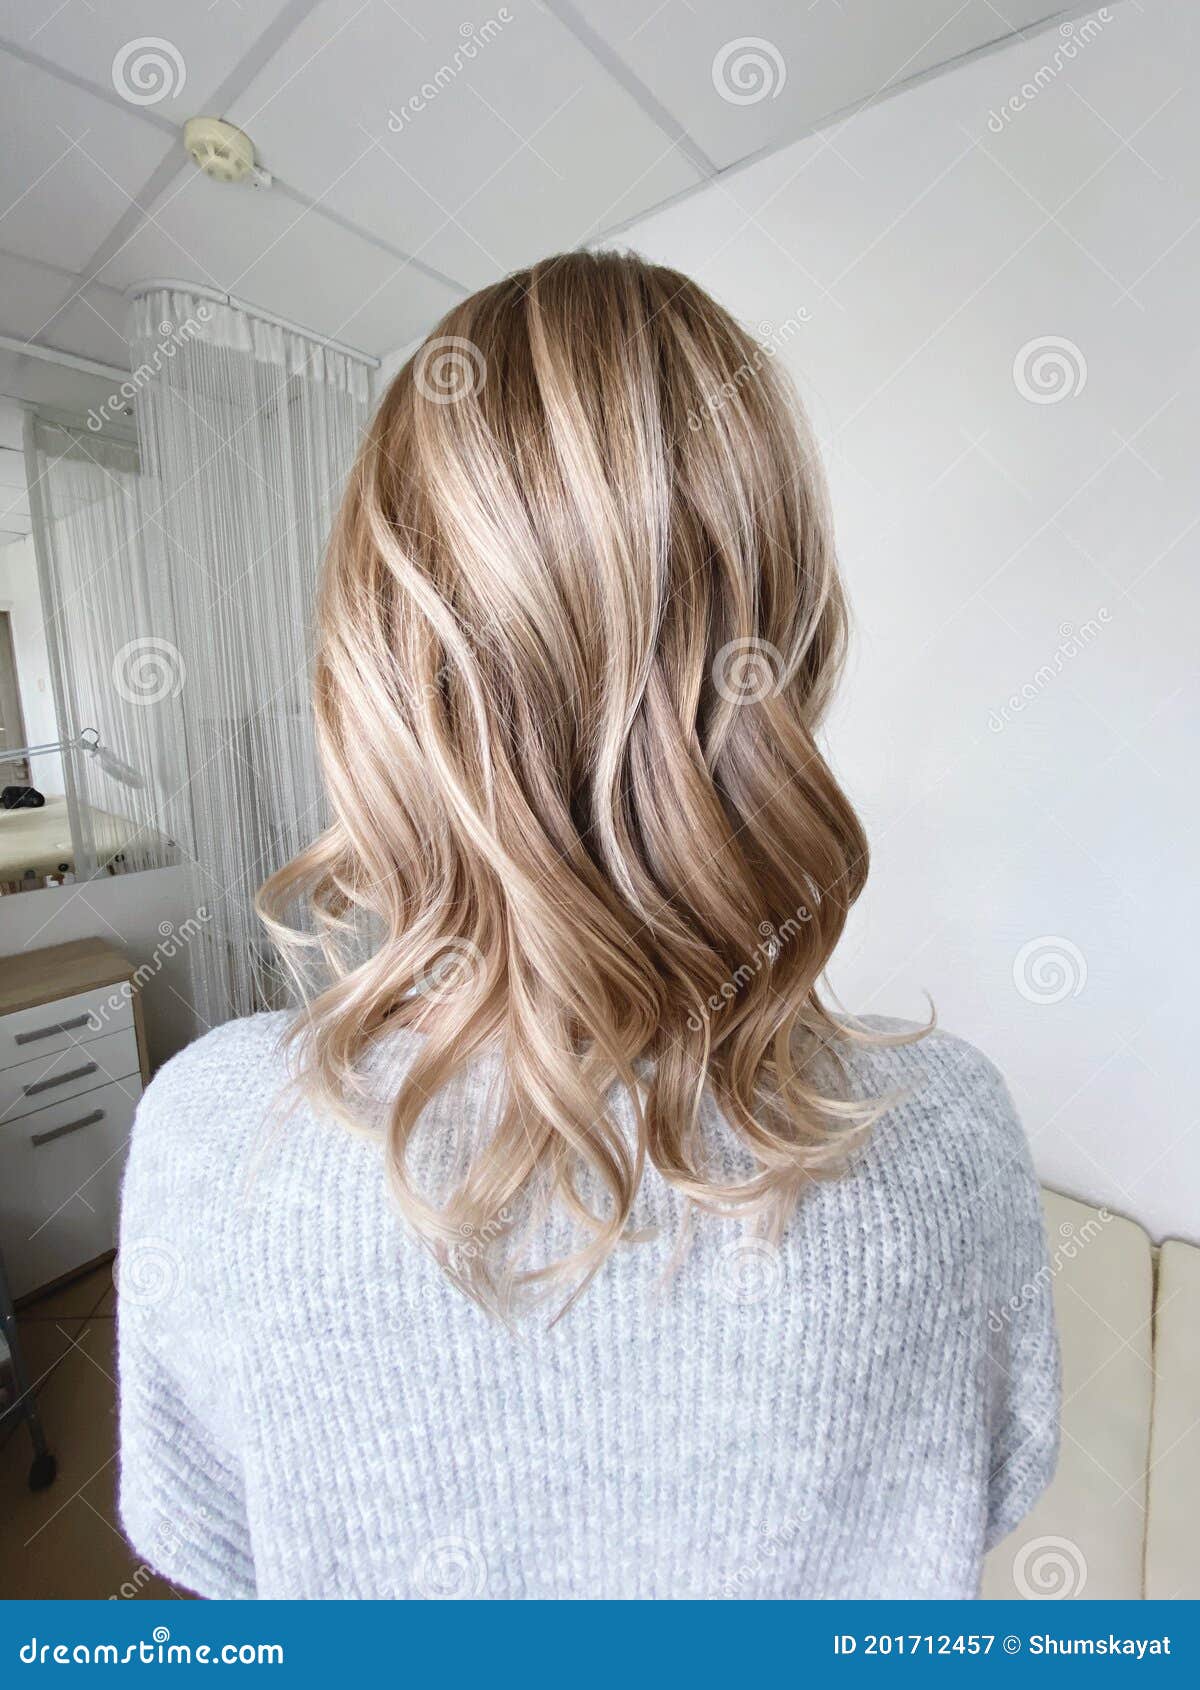 Hairstyle Ombre Color .Highlight Hair Stock Image - Image of balayage,  long: 201712457